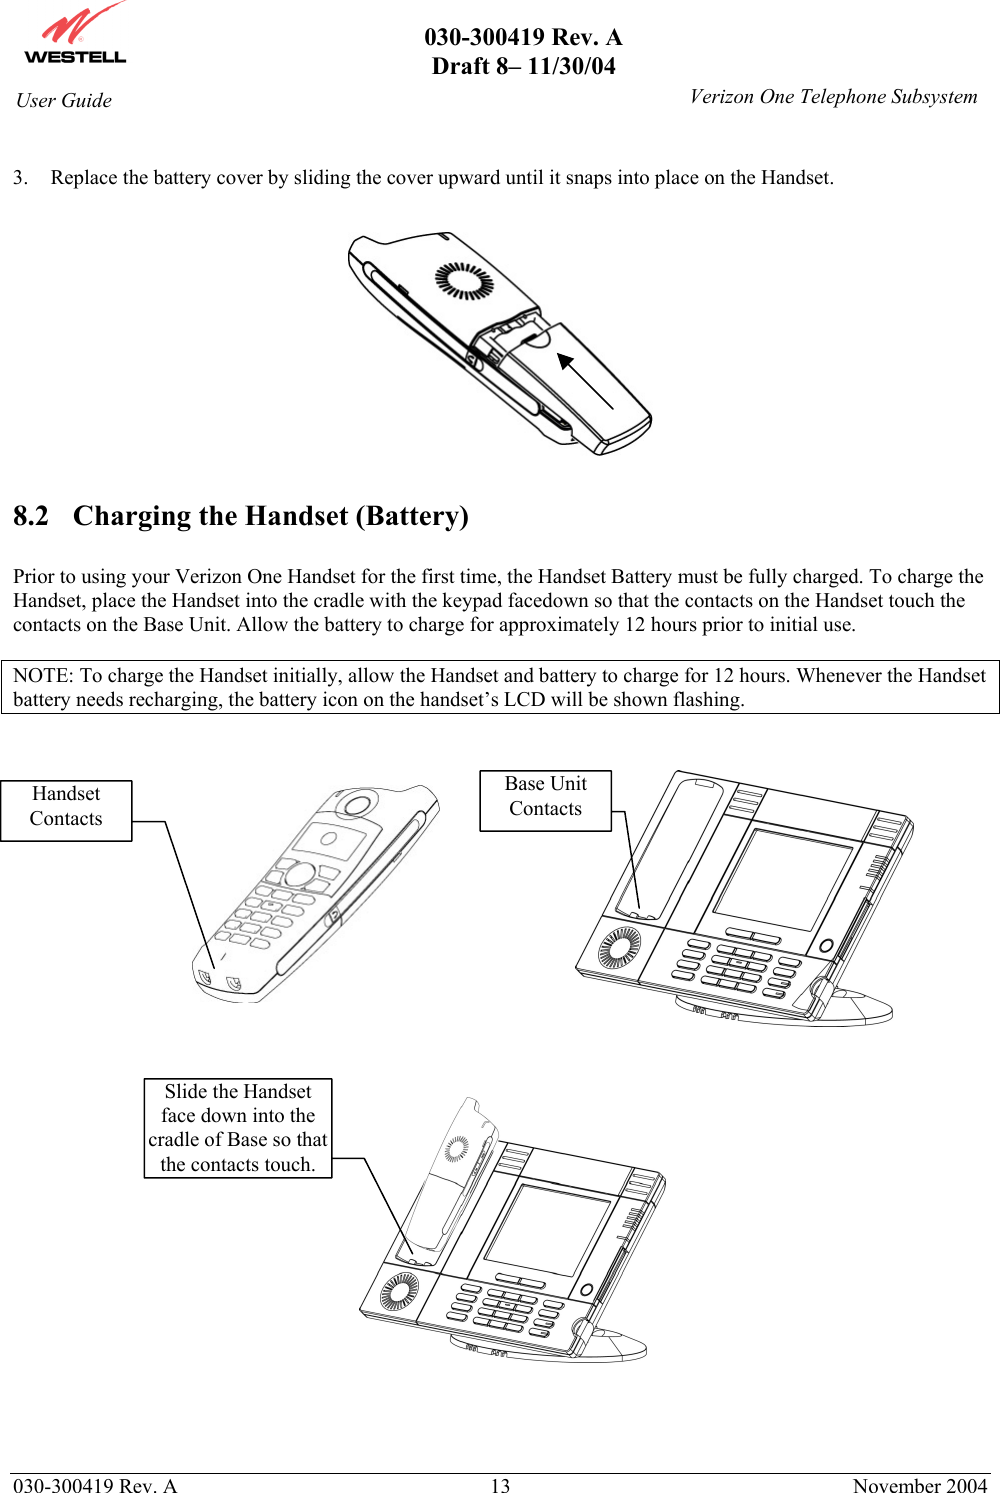       030-300419 Rev. A Draft 8– 11/30/04    030-300419 Rev. A  13  November 2004 User Guide   Verizon One Telephone Subsystem 3.  Replace the battery cover by sliding the cover upward until it snaps into place on the Handset.    8.2  Charging the Handset (Battery)  Prior to using your Verizon One Handset for the first time, the Handset Battery must be fully charged. To charge the Handset, place the Handset into the cradle with the keypad facedown so that the contacts on the Handset touch the contacts on the Base Unit. Allow the battery to charge for approximately 12 hours prior to initial use.   NOTE: To charge the Handset initially, allow the Handset and battery to charge for 12 hours. Whenever the Handset battery needs recharging, the battery icon on the handset’s LCD will be shown flashing.                                                        Handset Contacts Base Unit Contacts Slide the Handset face down into the cradle of Base so that the contacts touch. 